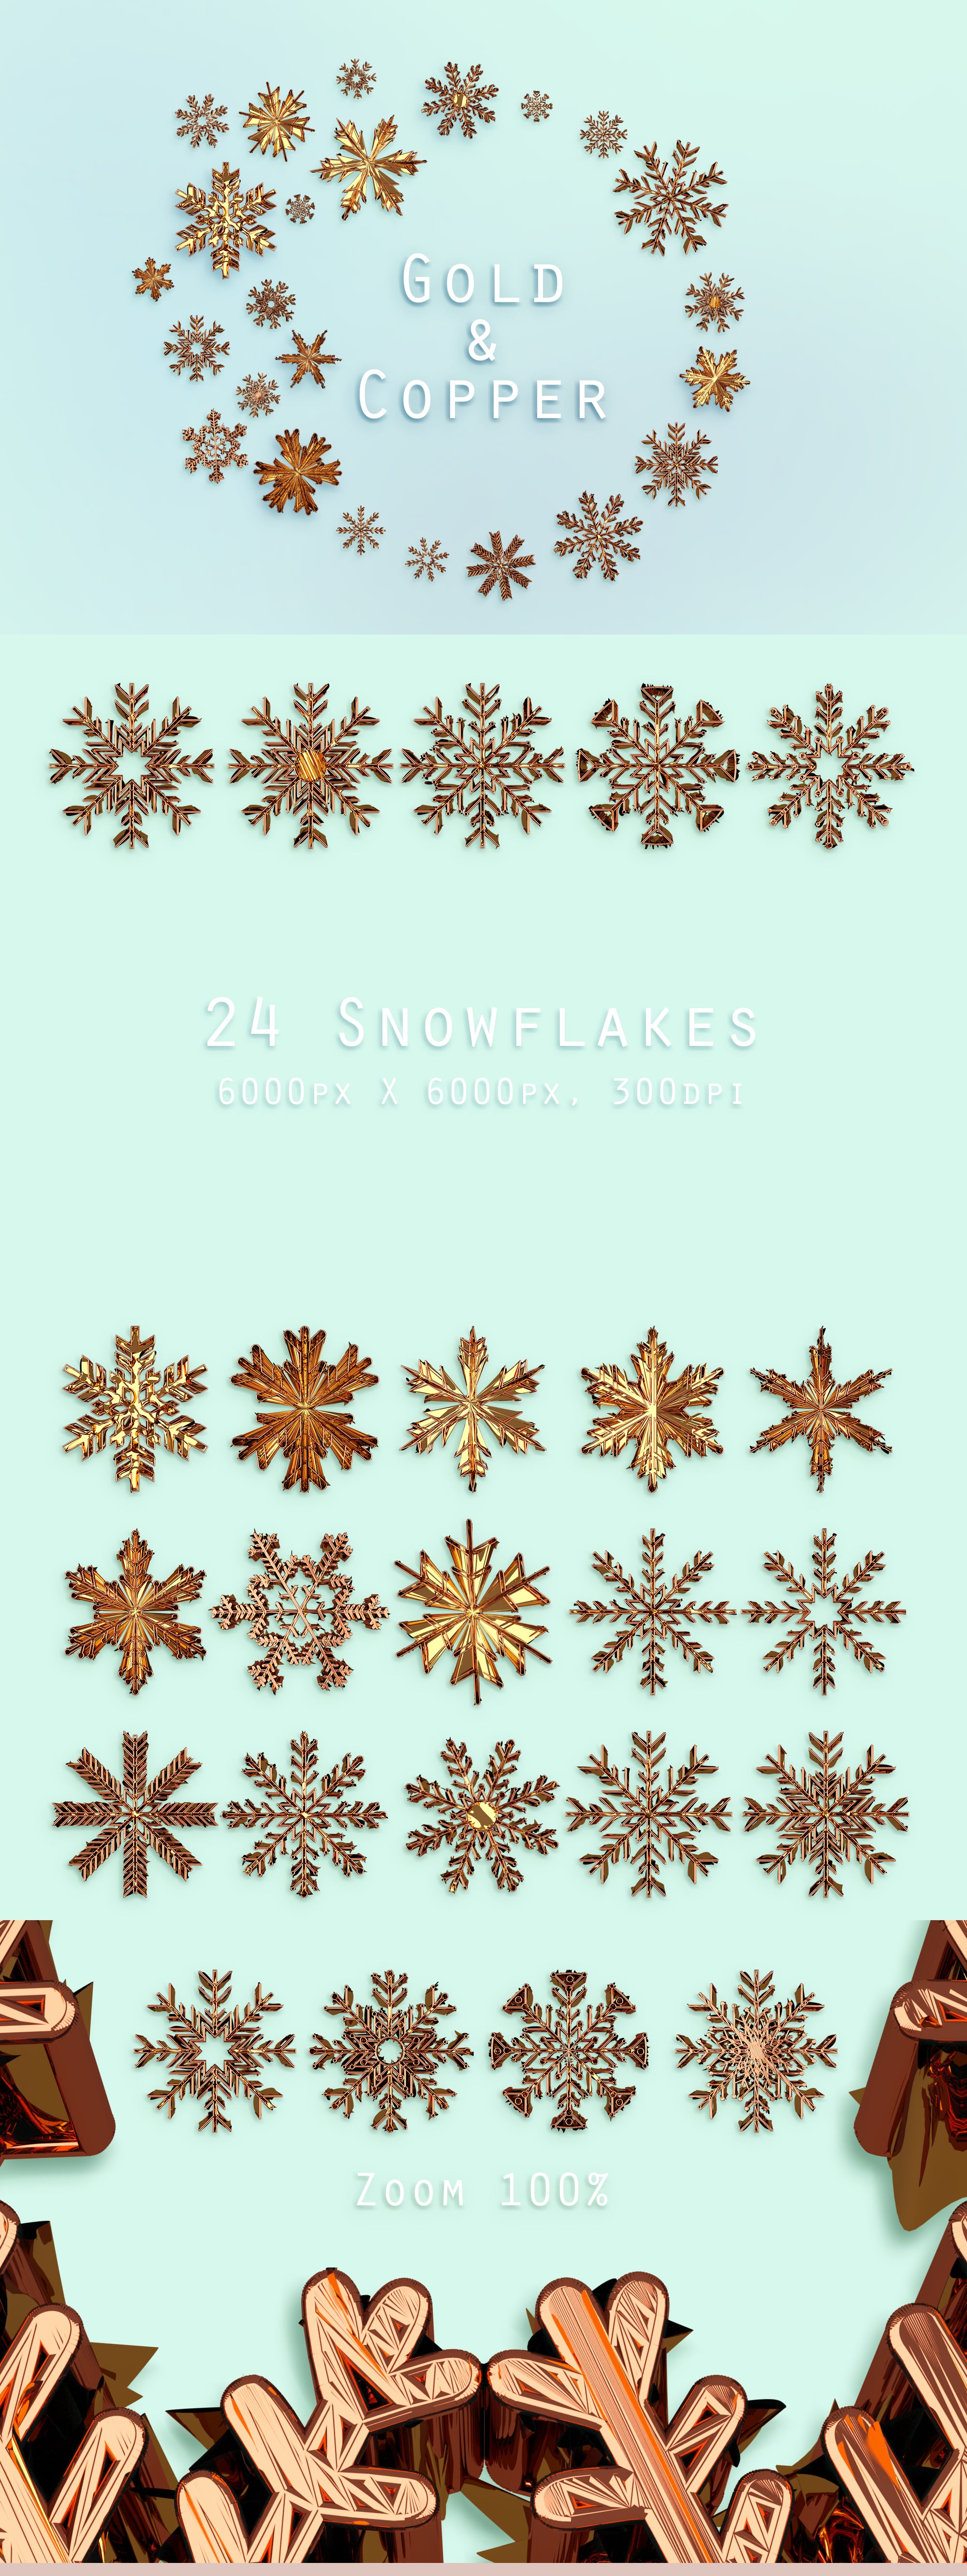 These are beautiful and contemporary snowflakes on the pastel background.